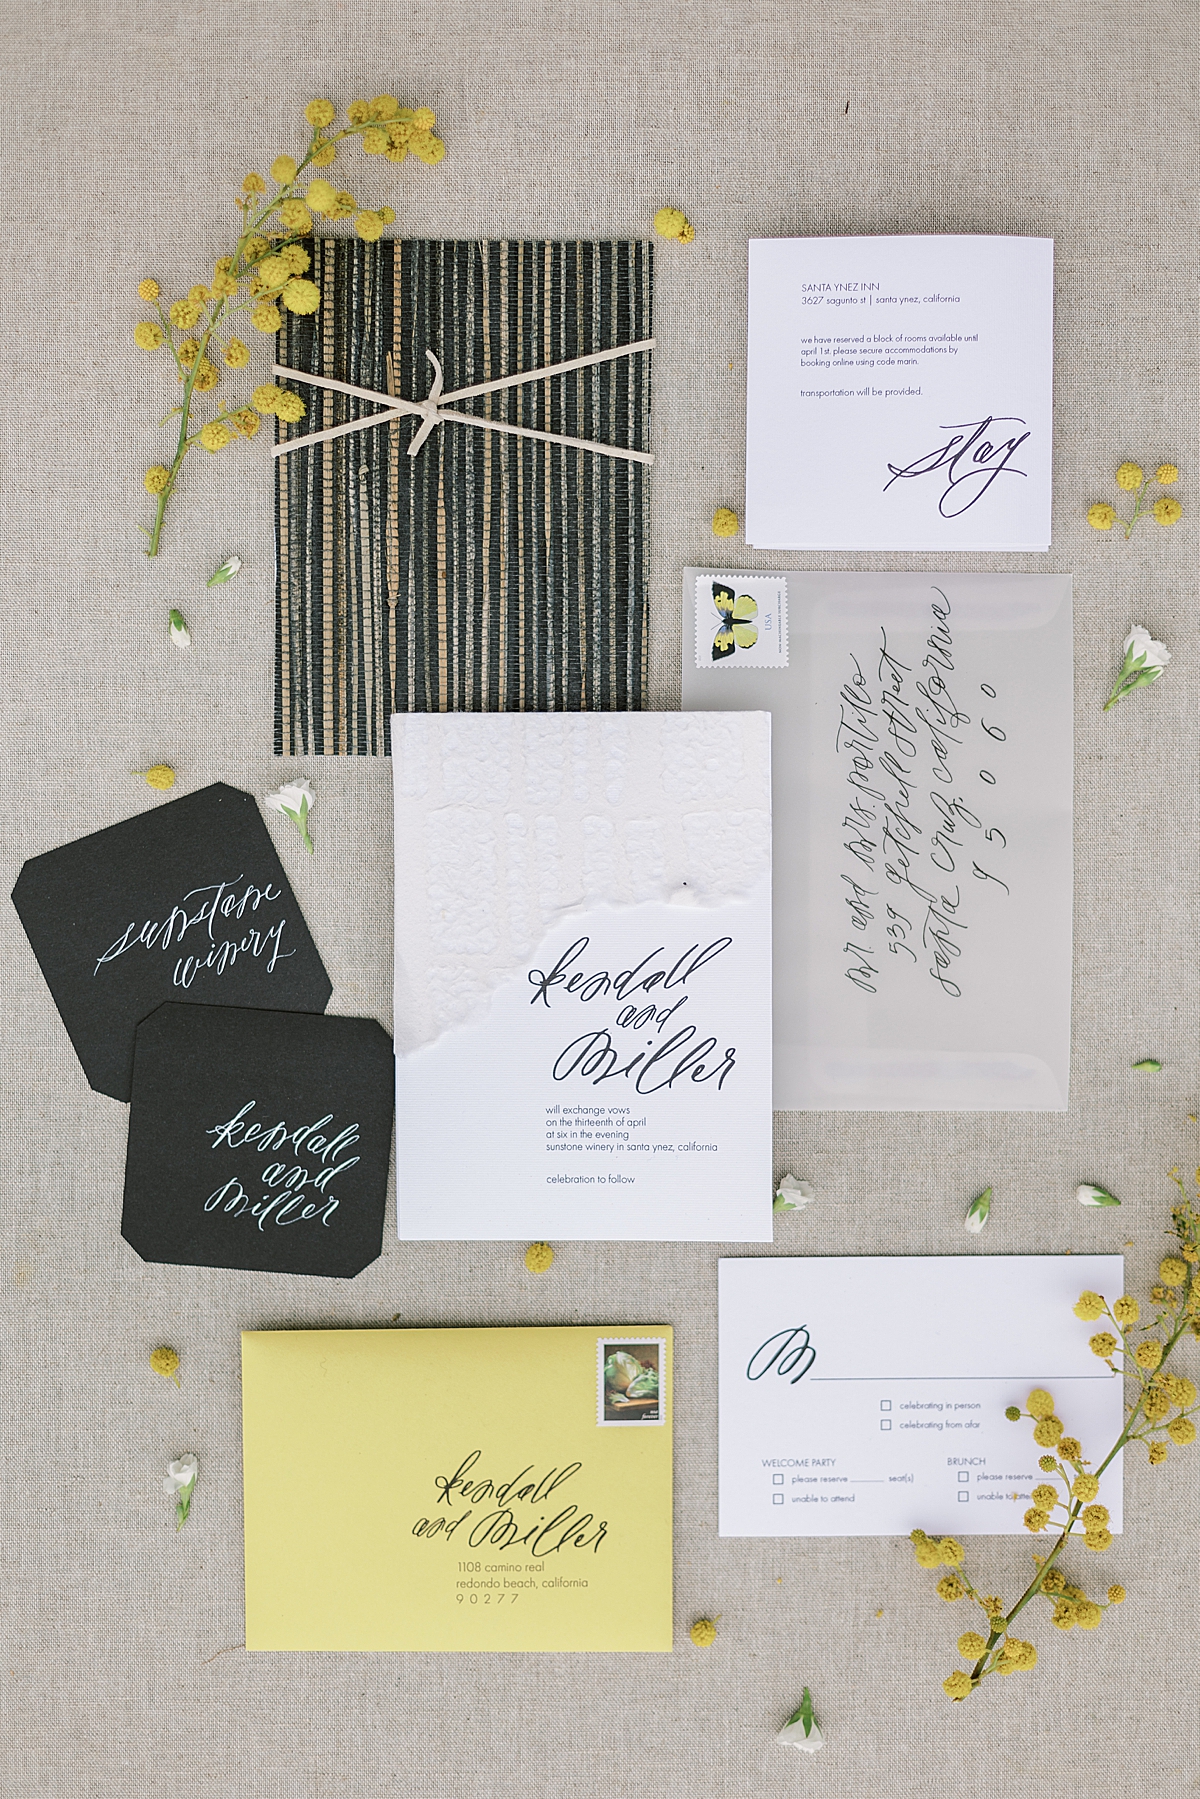 The couple's yellow and black invitation suite to complement their wedding colors.